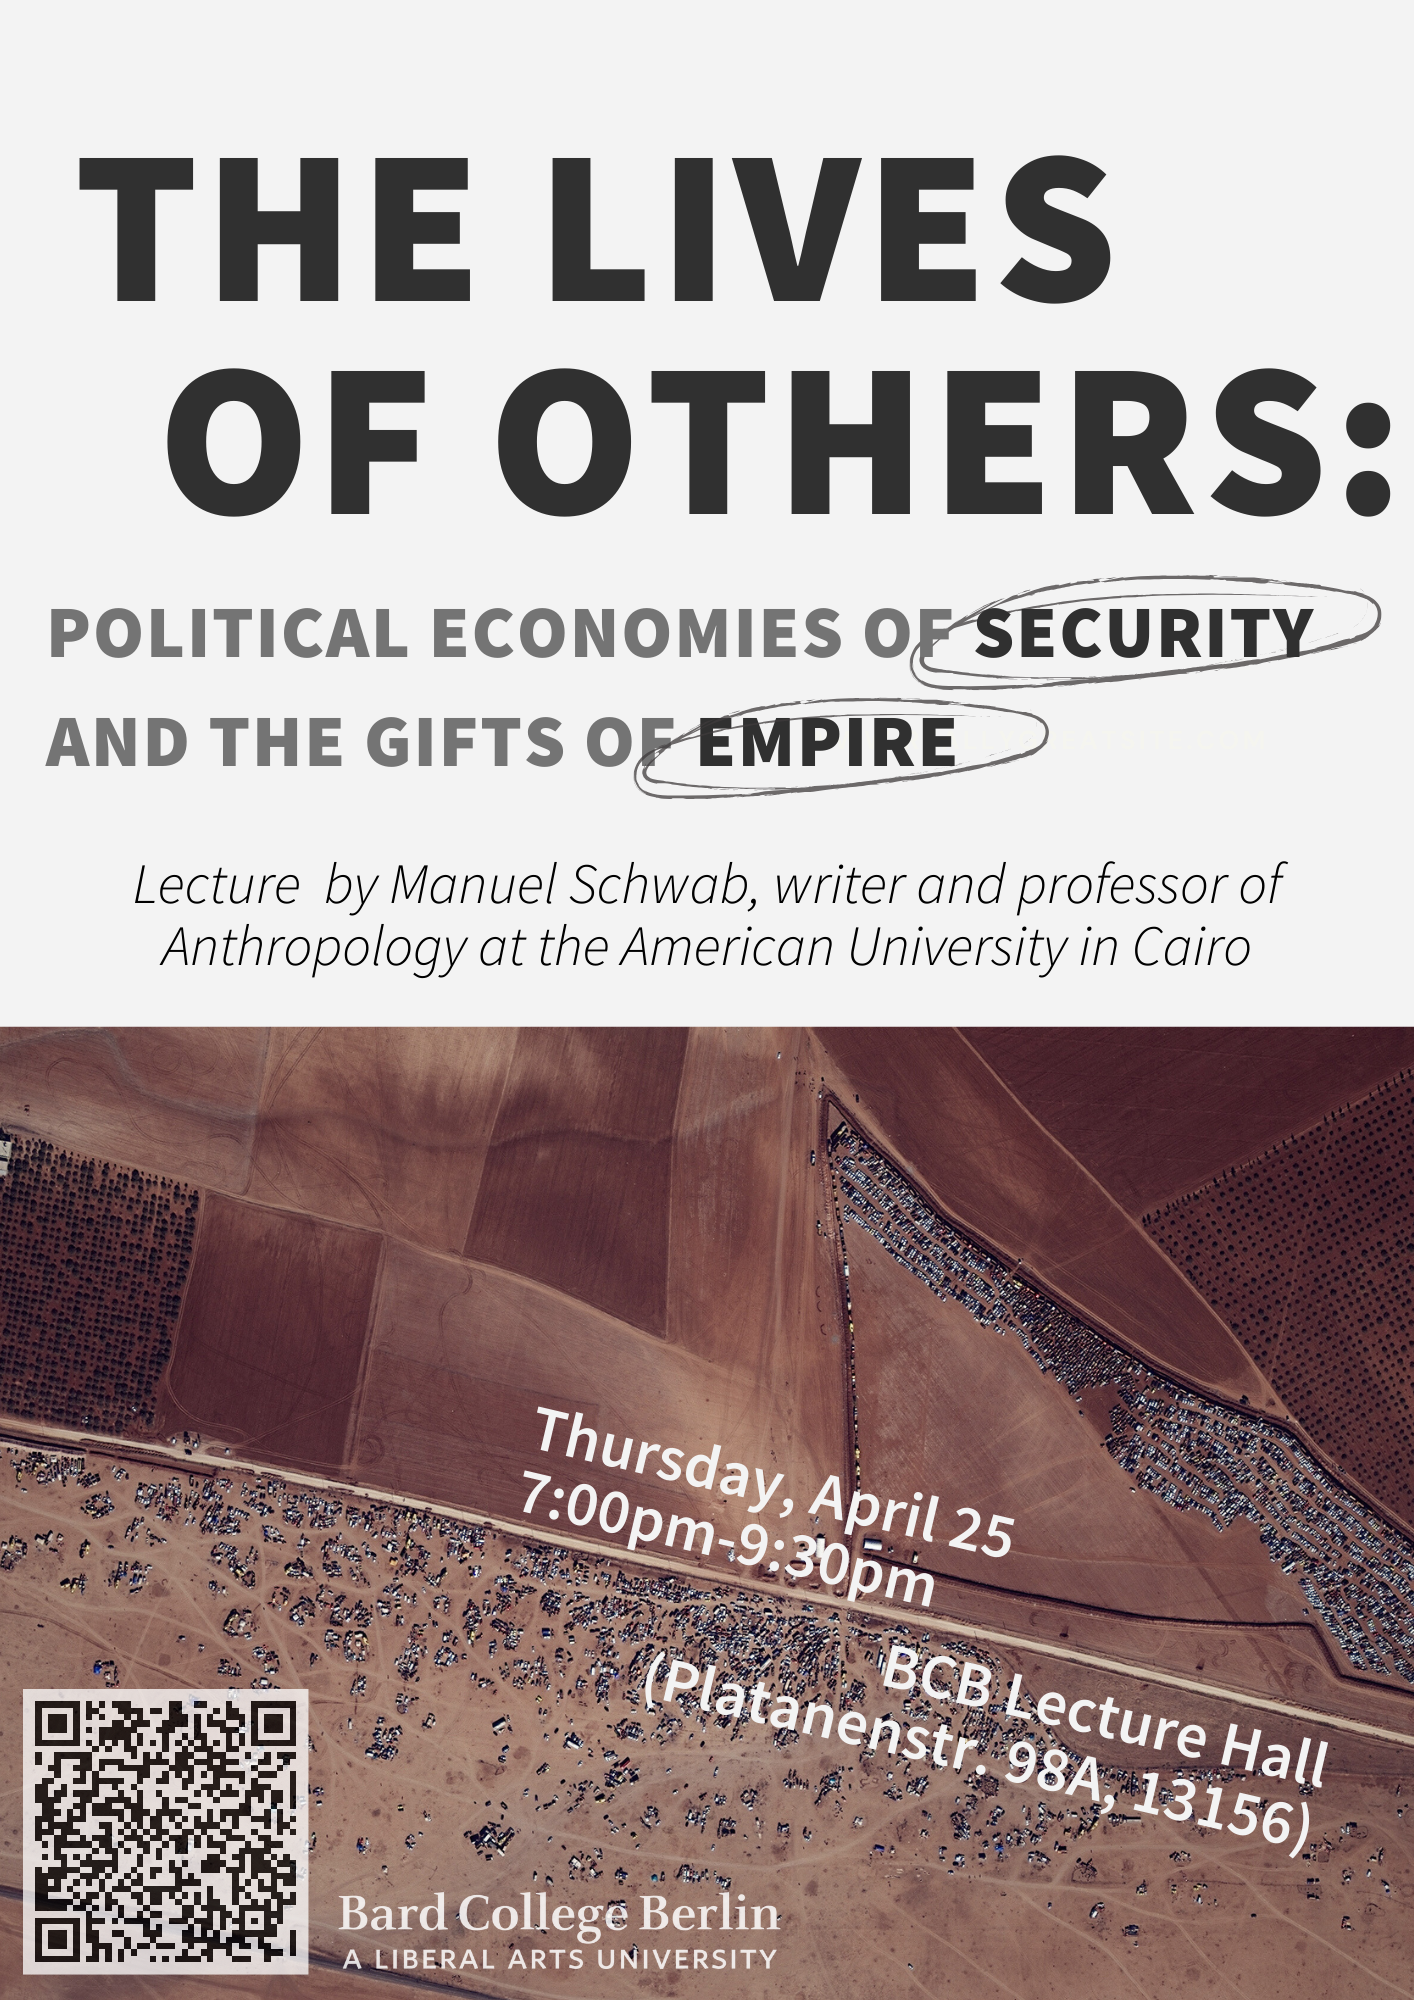 The Lives of Others: Political Economies of Security and the Gifts of Empire